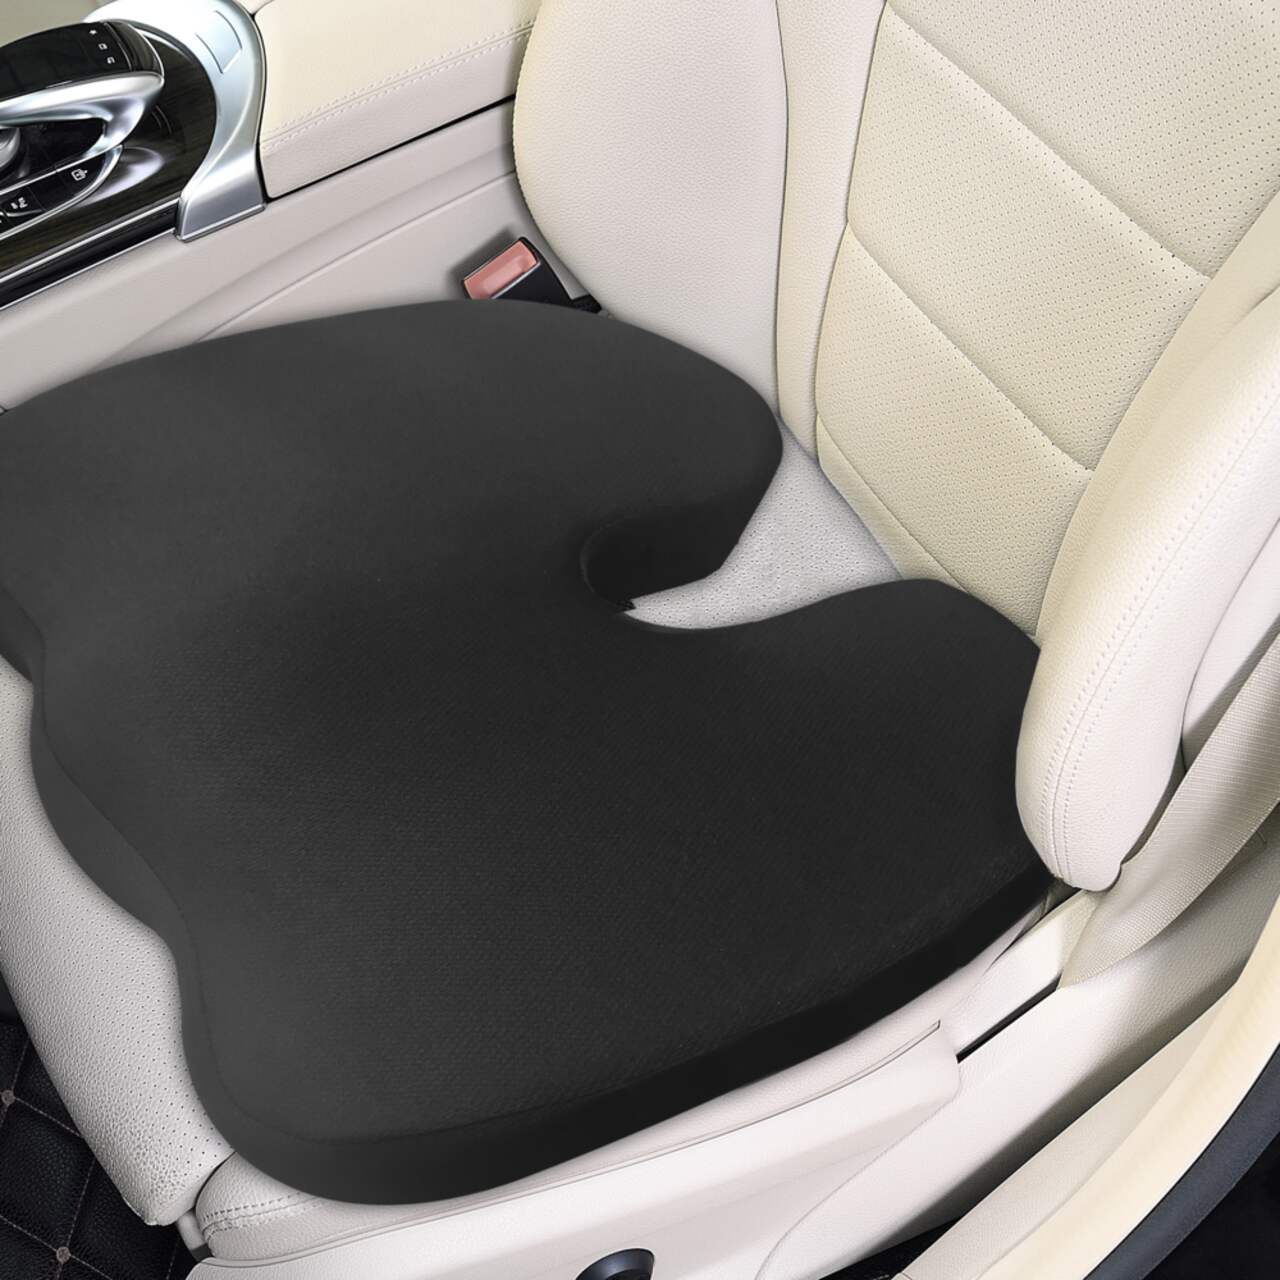 https://media-www.canadiantire.ca/product/automotive/car-care-accessories/auto-comfort/0320124/autotrends-foam-gel-seat-cushion-black-33ee6208-23f4-4273-aefd-28ee40193bdc.png?imdensity=1&imwidth=1244&impolicy=mZoom